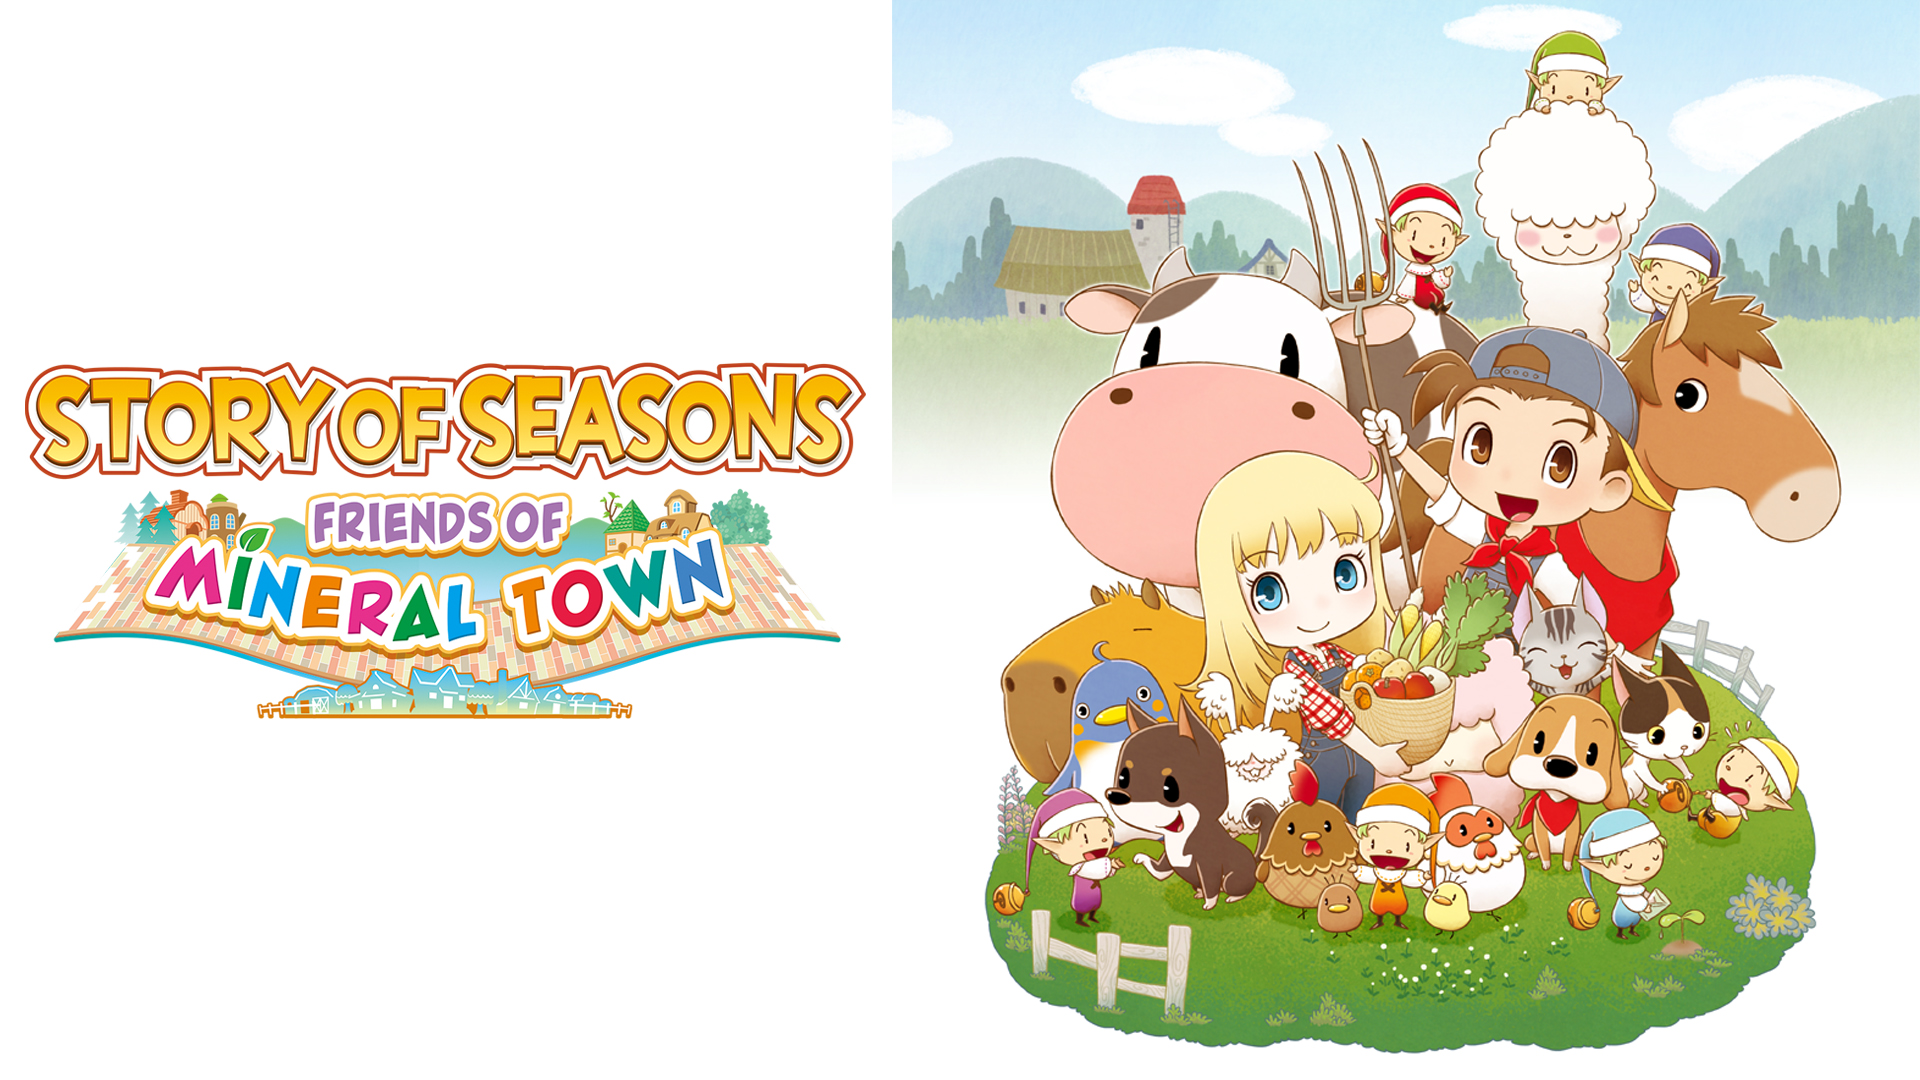 Story of Seasons: Friends of Mineral Town PC Price, Requirements, and